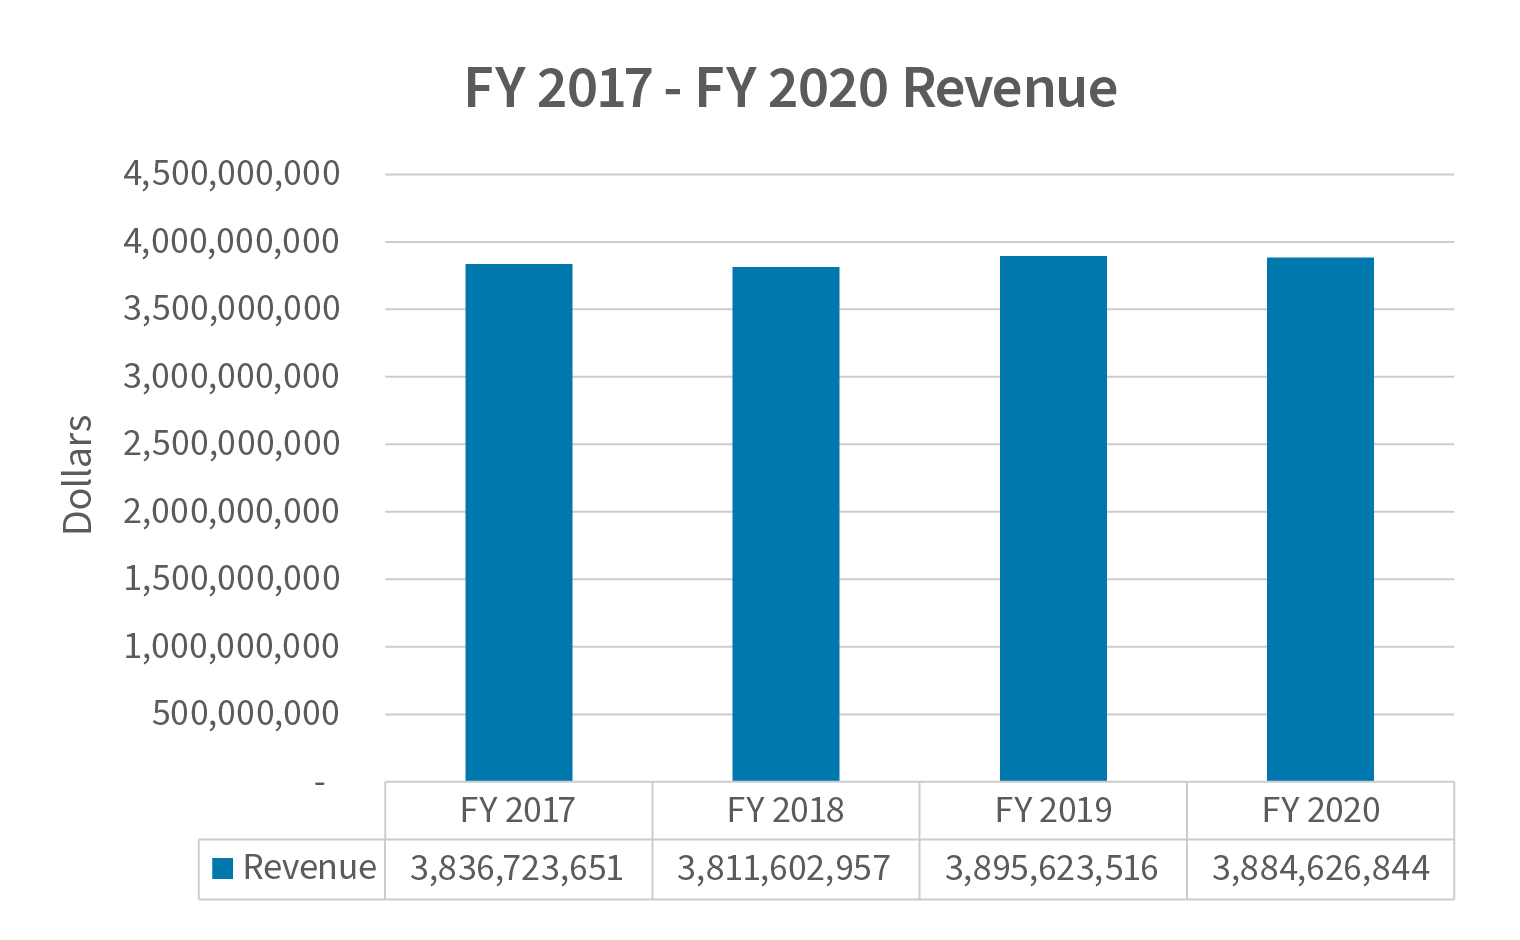 Chart reflecting Fiscal Year Revenue from 2017 to 2020. Fiscal year 2017 Revenue is 3,836,723,651 and Fiscal Year 2018 is 3,811,602,957 and Fiscal Year 2019 is 3, 895,623,516 and Fiscal Year 2020 is 3,884,626,844